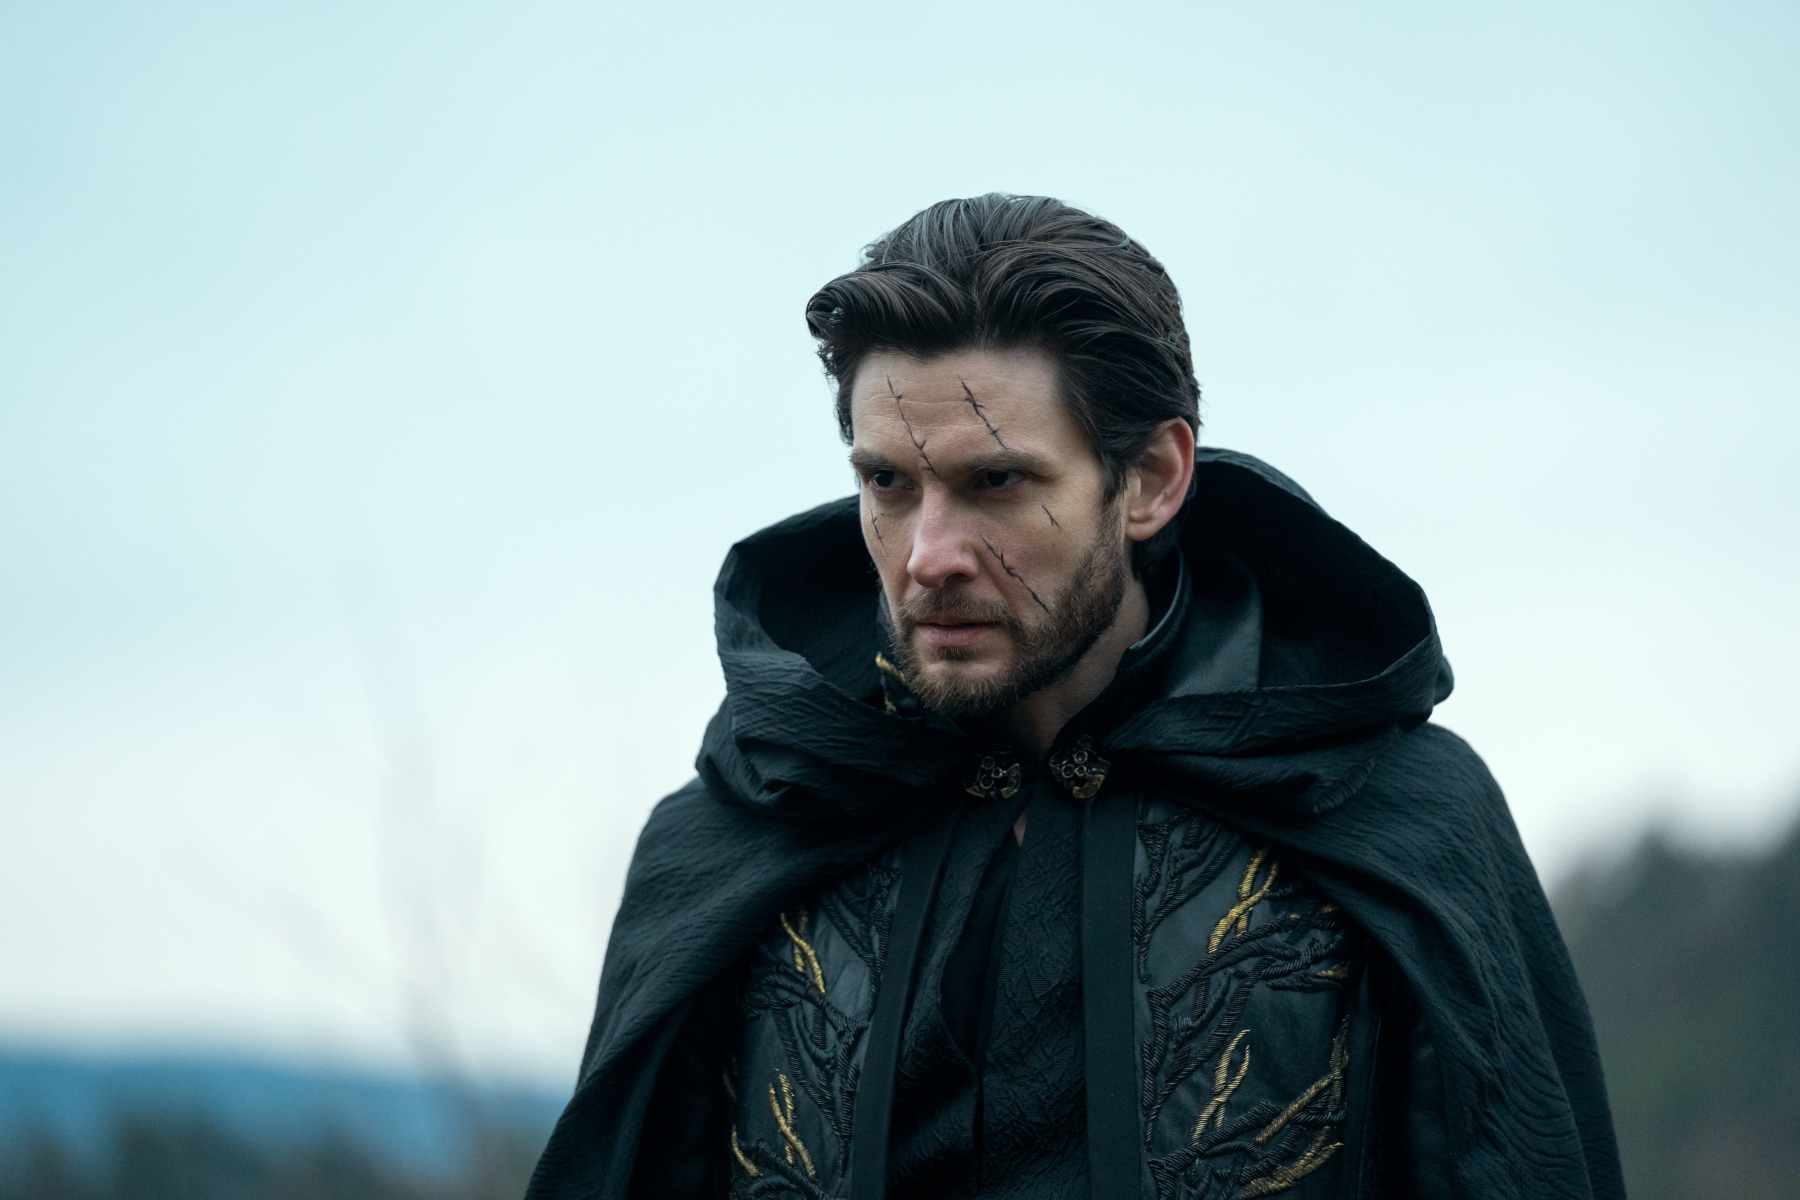 Ben Barnes as the Darkling in 'Shadow and Bone' Season 2 for our article about its release date. He's got a scar across his face and looks angry.